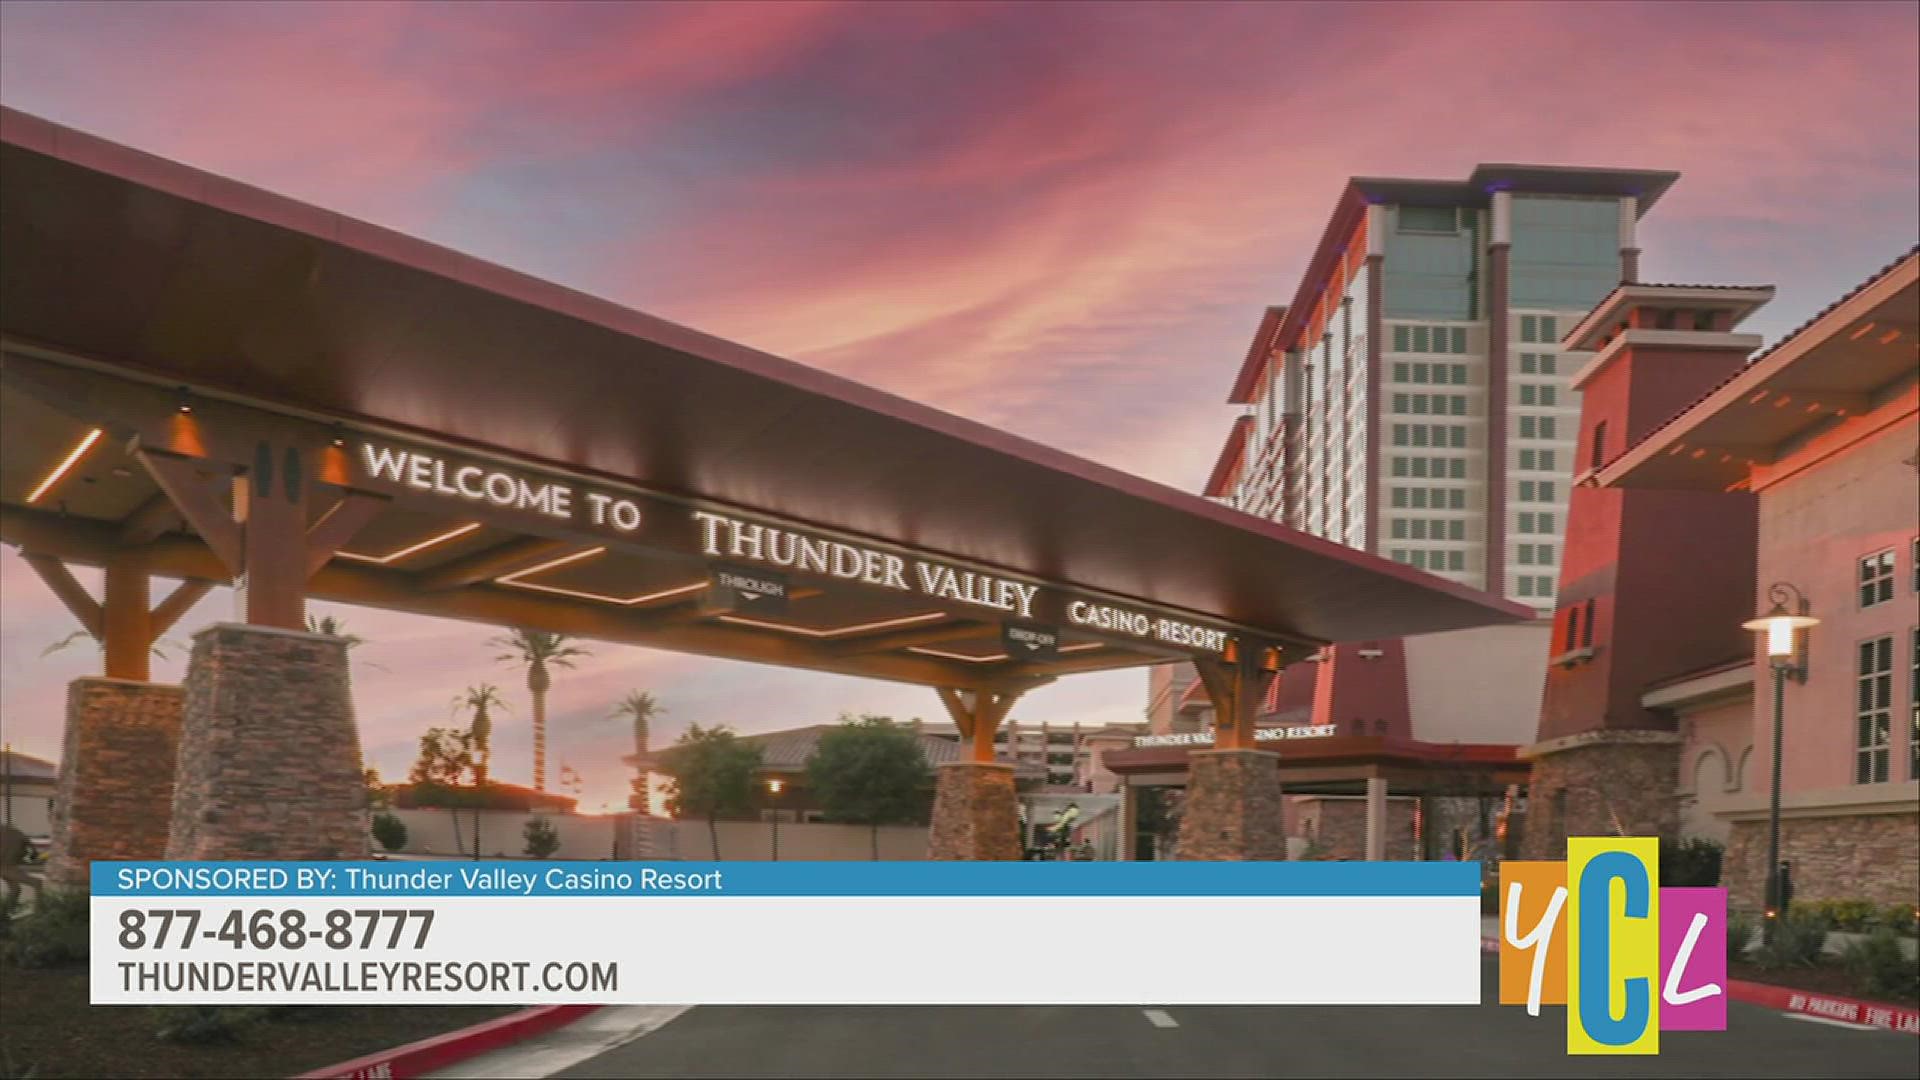 The Venue at Thunder Valley is a brand new indoor entertainment venue that will open February 2023. This segment is paid by Thunder Valley Casino Resort.